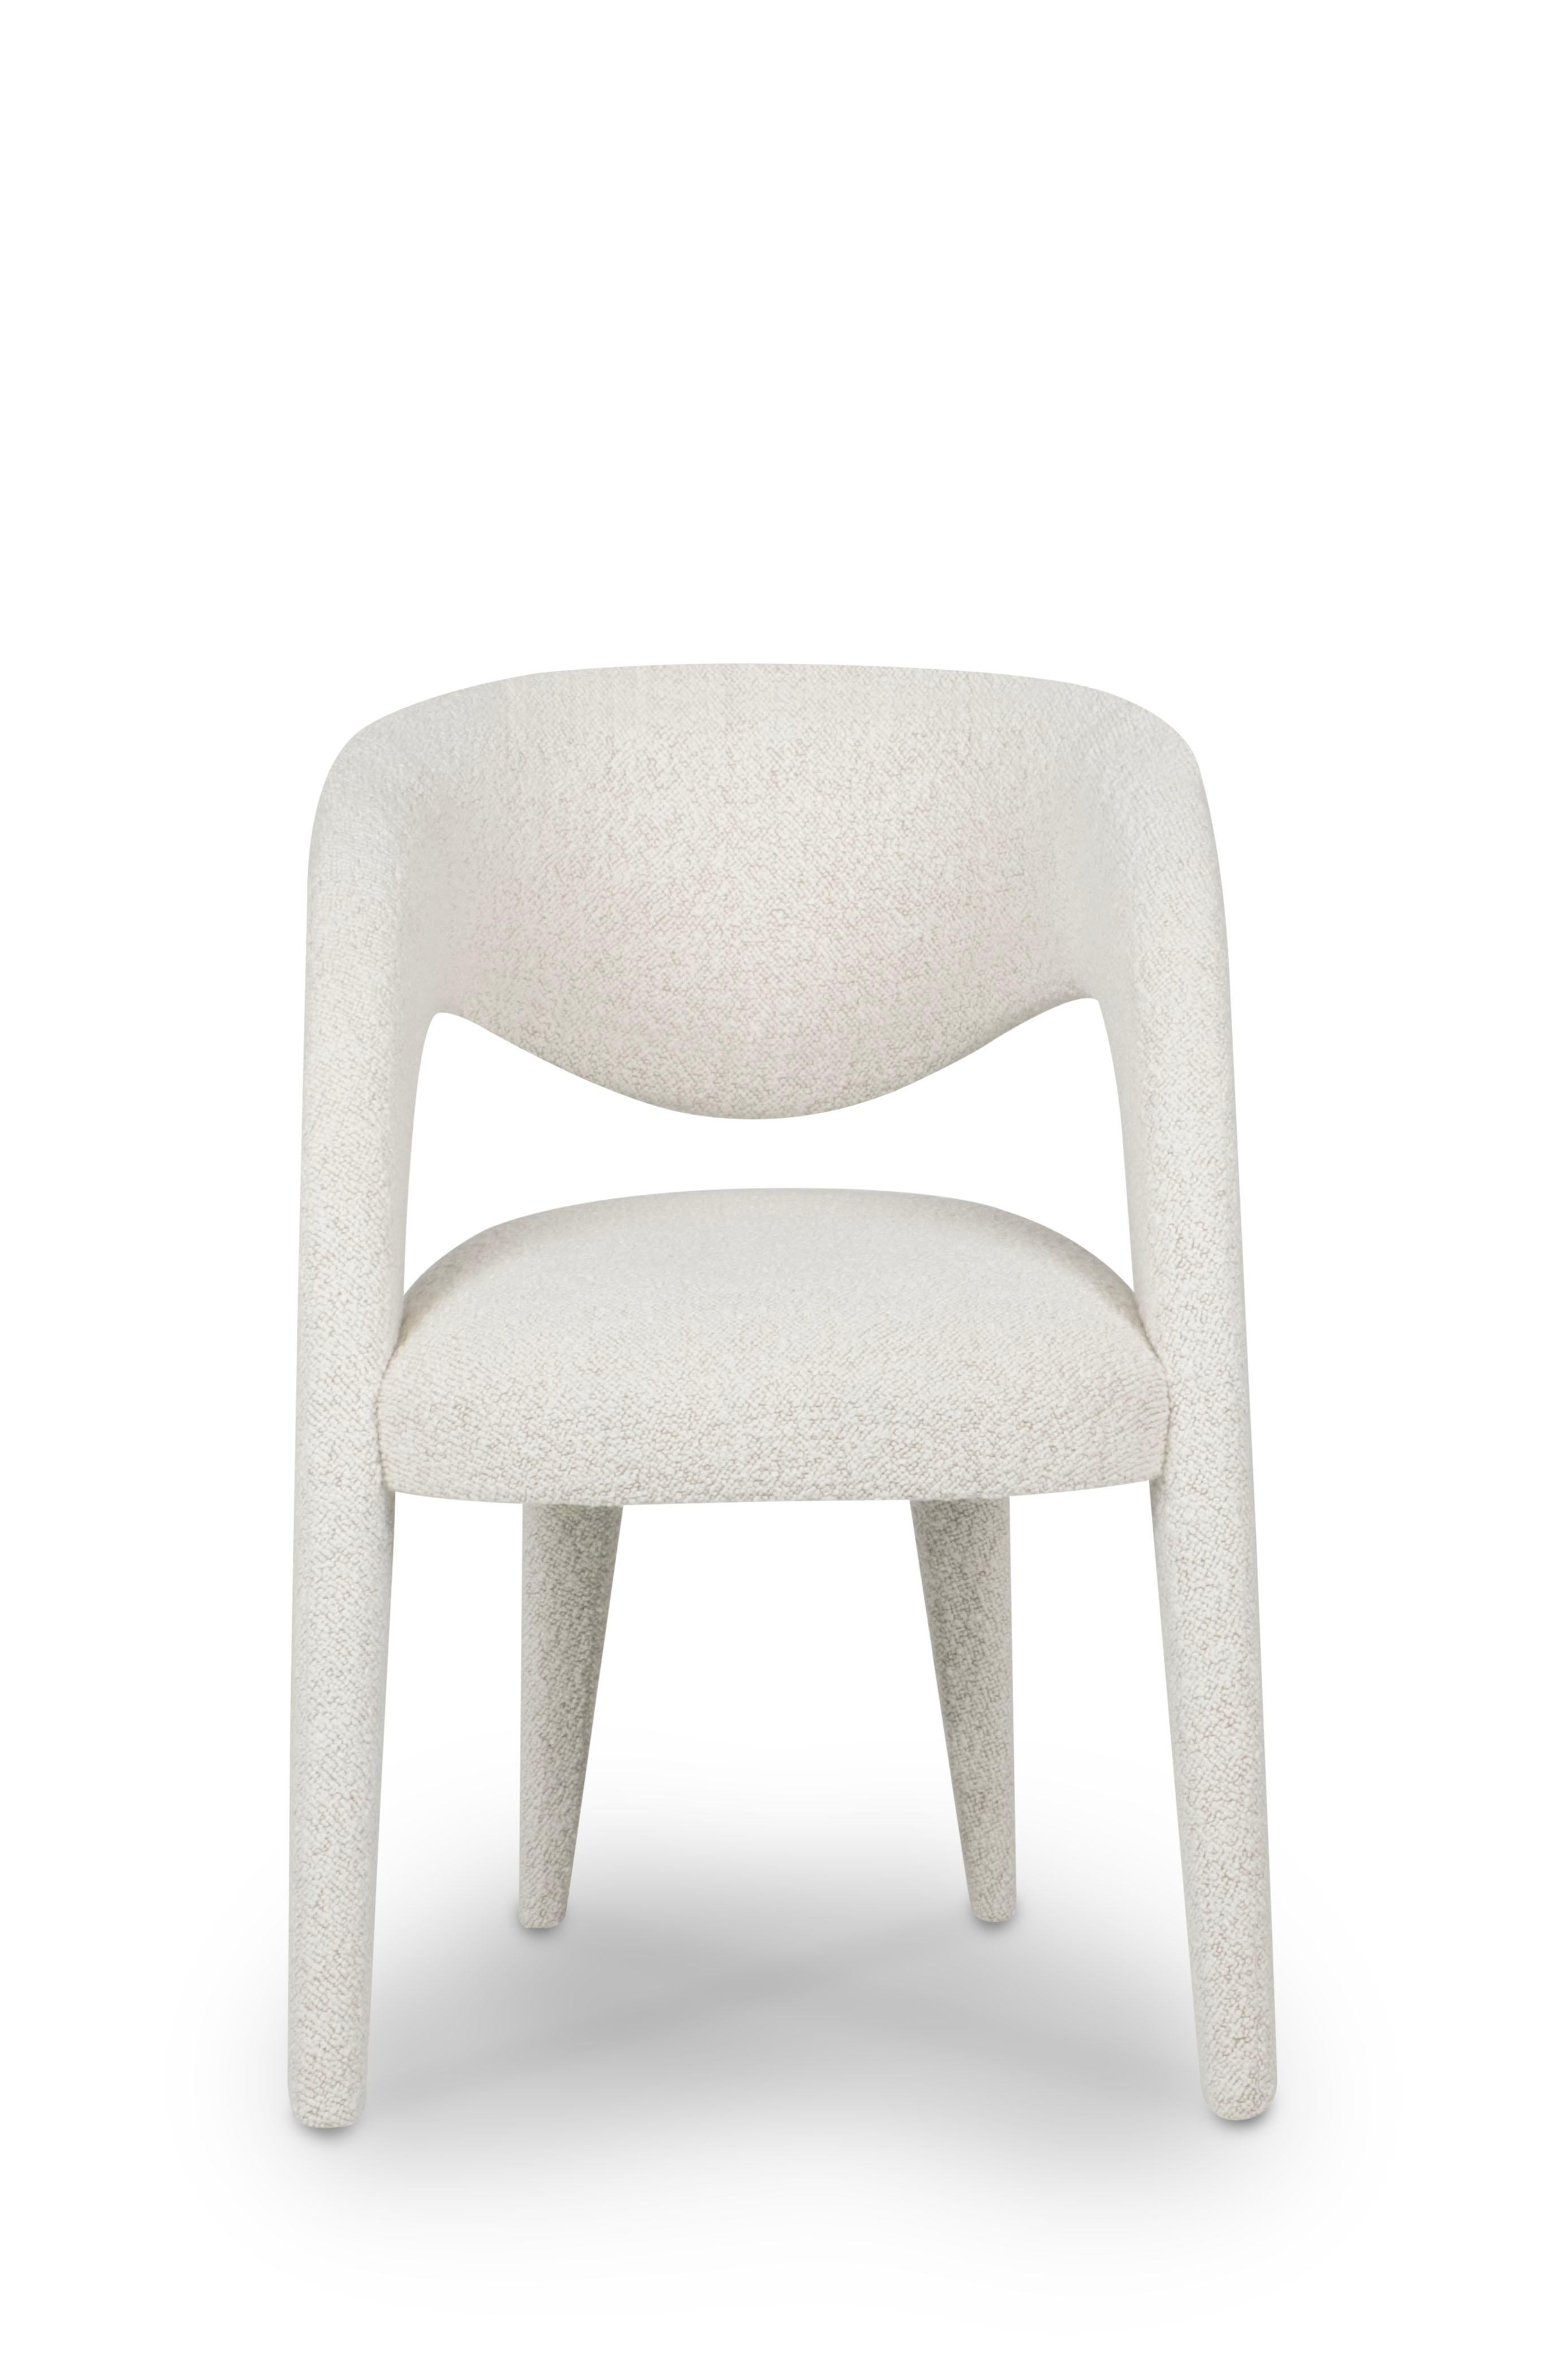 Modern Laurence Dining Chairs, DEDAR Bouclé, Handmade in Portugal by Greenapple For Sale 8